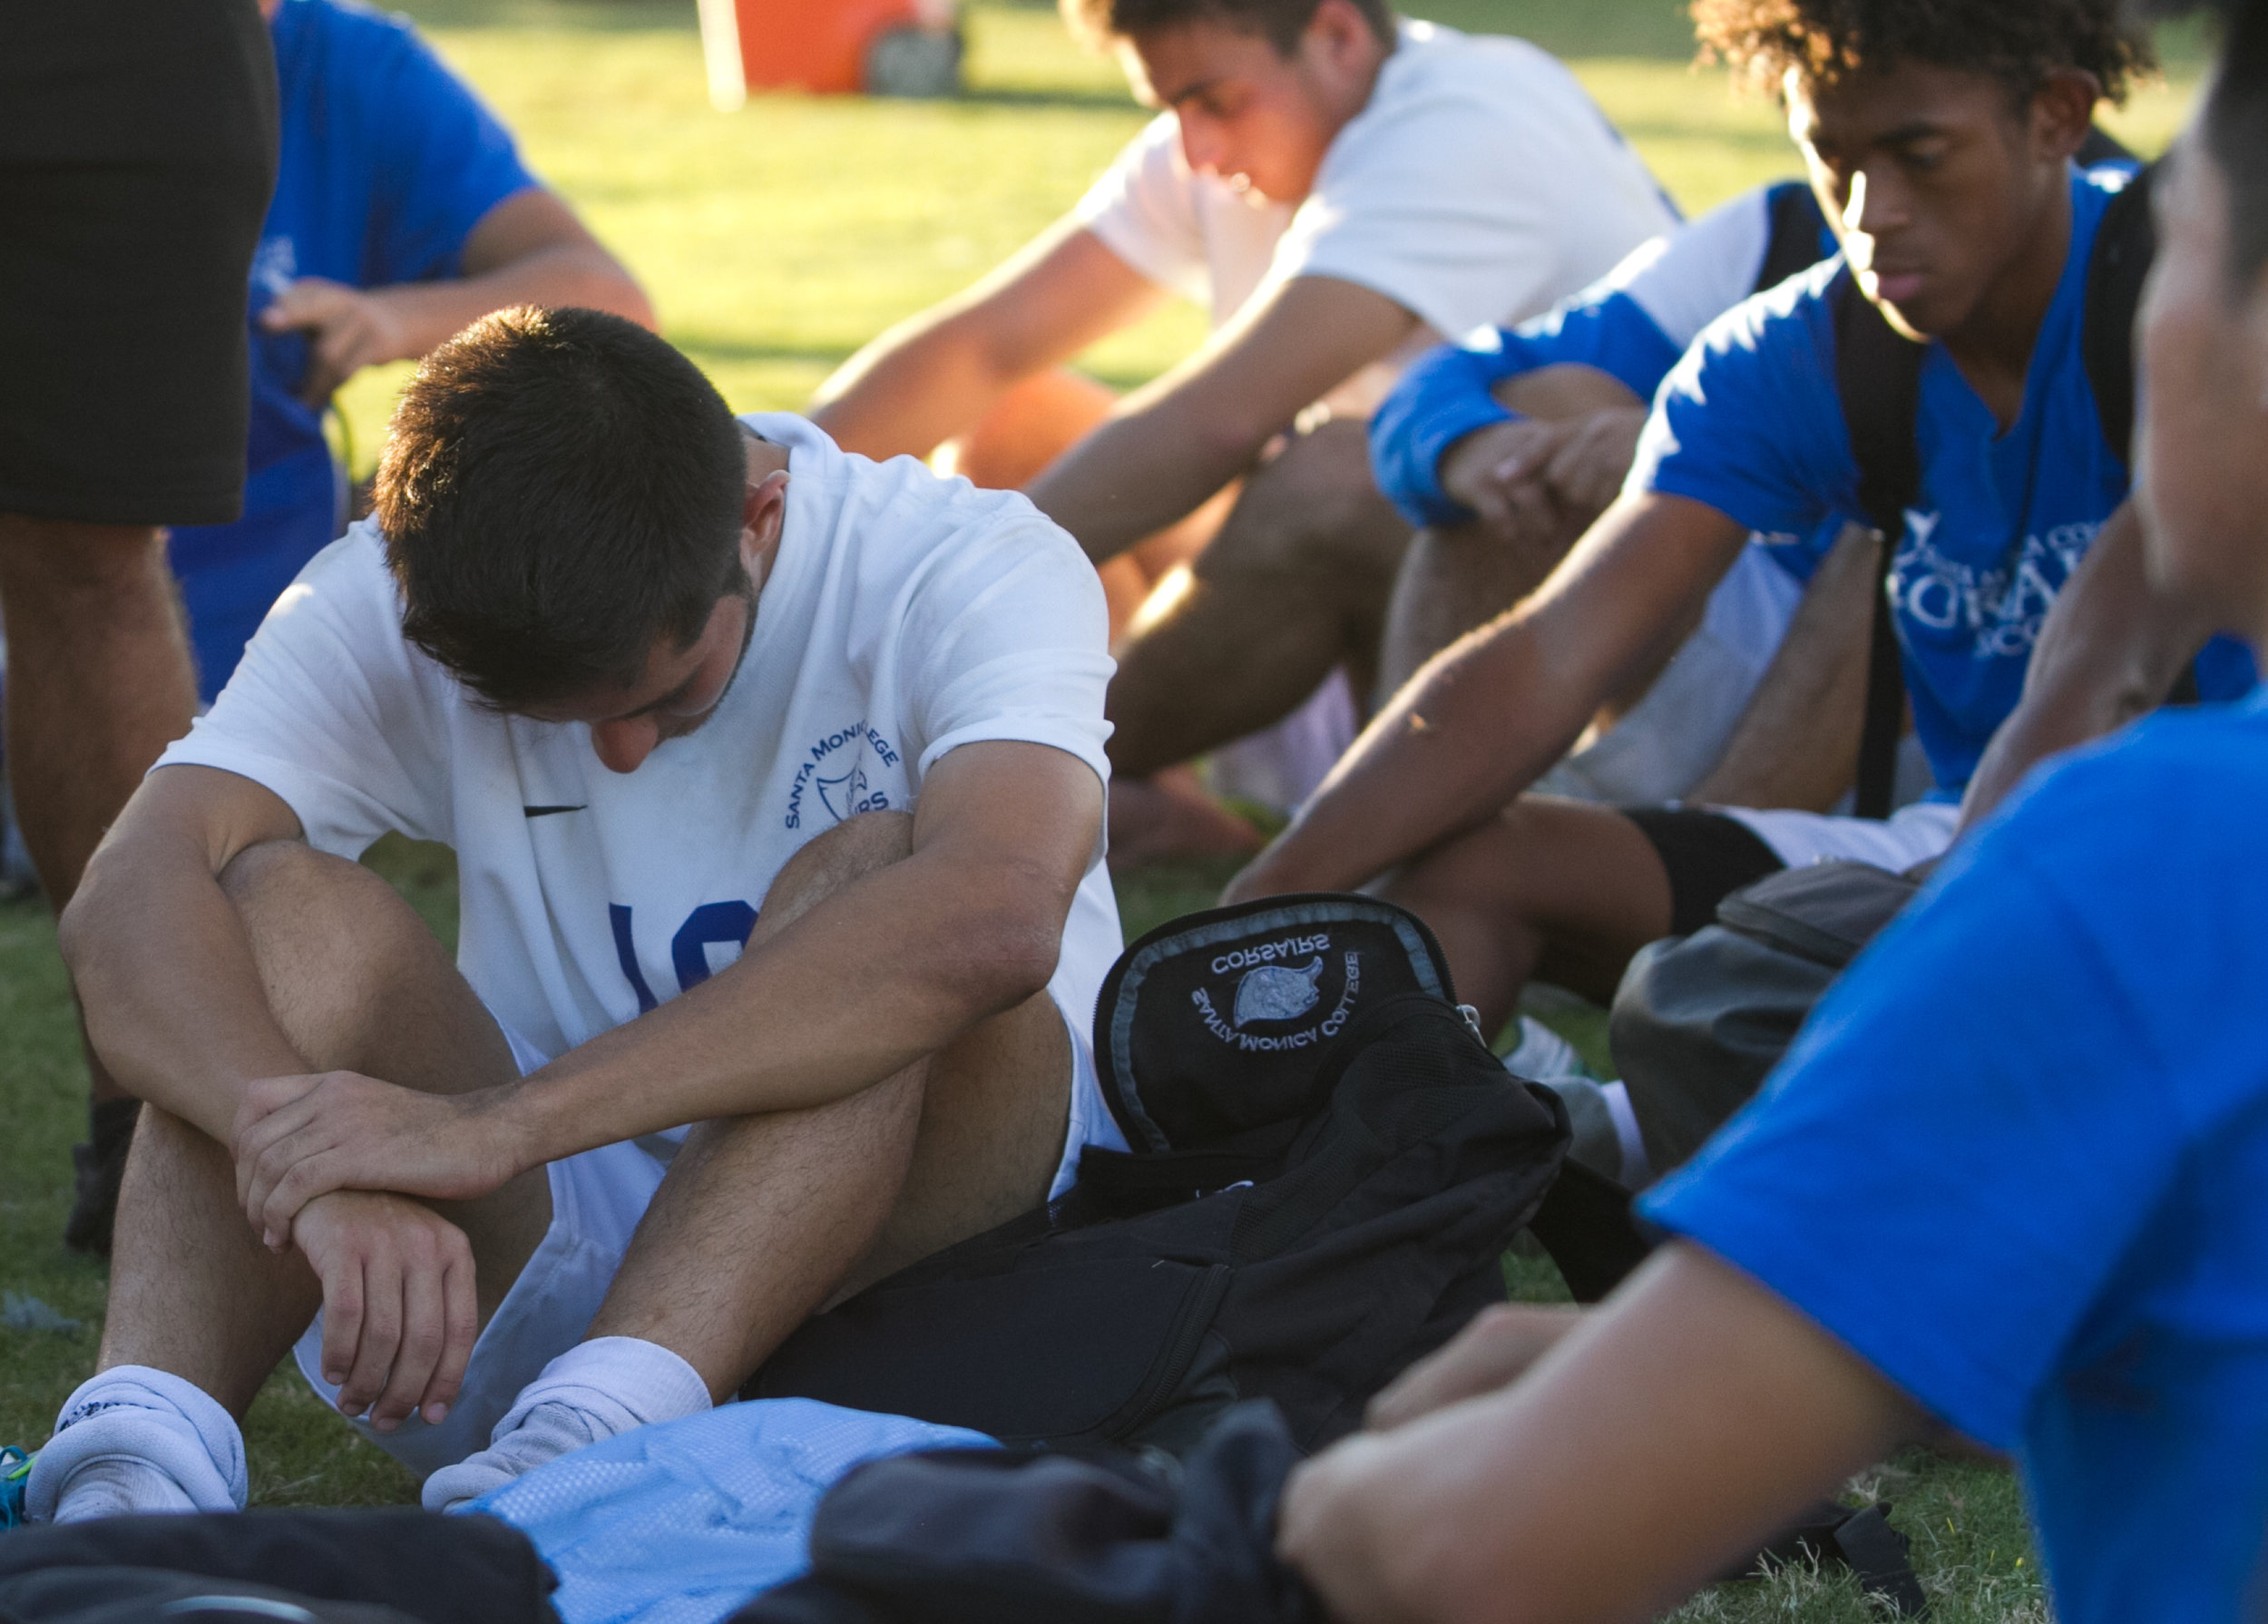  Santa Monica College Corsair Carlos Rincon (16)(CTR) has his head down as their coach addresses the team after losing to Cerritos College on Wednesday, November 22, 2017, at Cerritos College in Norwalk, California. The Corsairs lose 2-1 and are elim